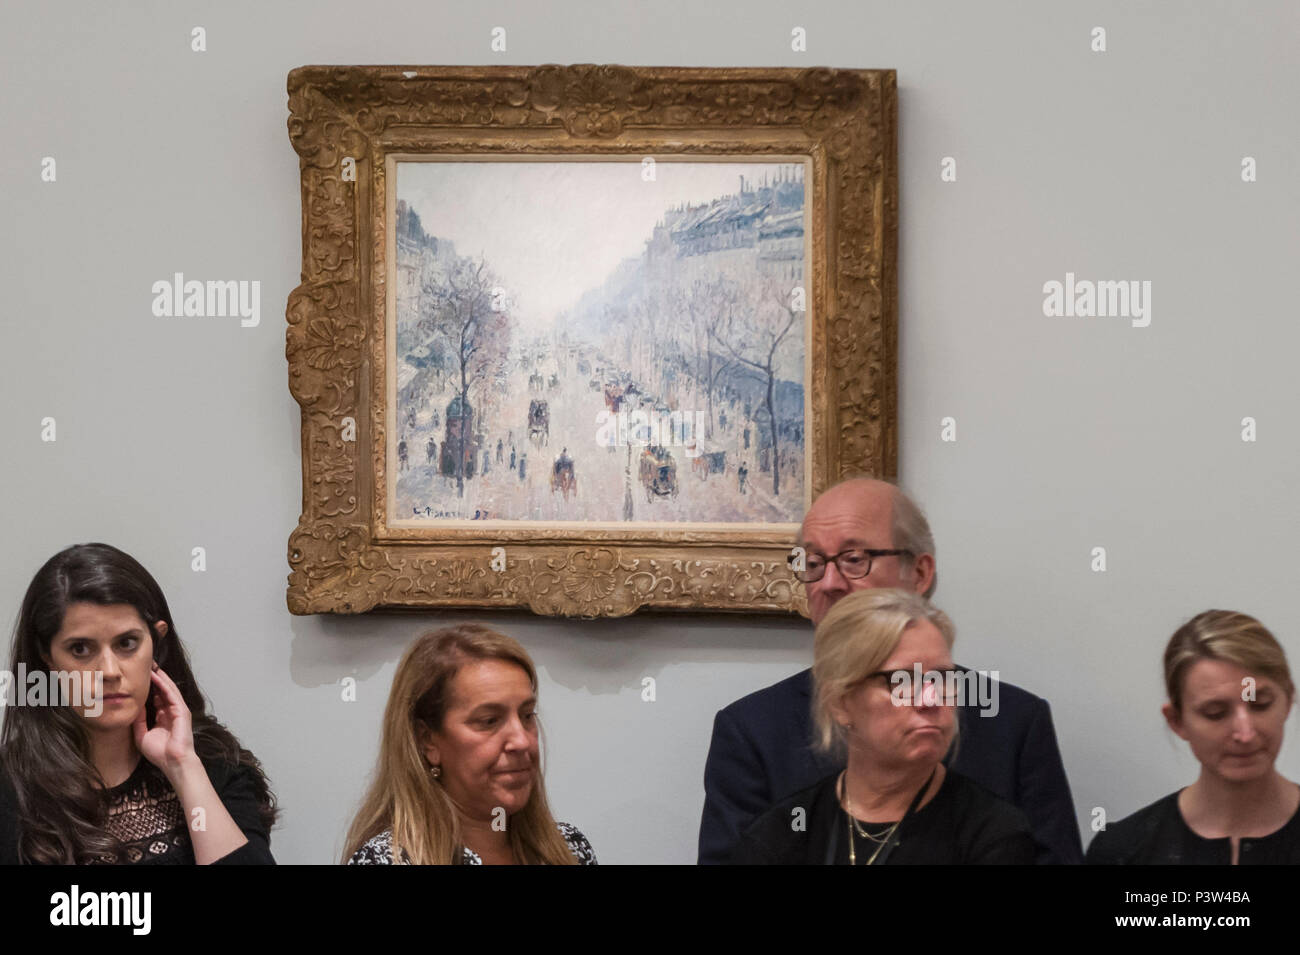 London, UK.  19 June 2018. ''Le Boulevard Montmartre, Brume Du Matin'' by Camille Pissarro, (Est. £3,000,000 - 5,000,000) sold for a hammer price of £2,900,000 at Sotheby's Impressionist & Modern art evening sale in New Bond Street.  Credit: Stephen Chung / Alamy Live News Stock Photo